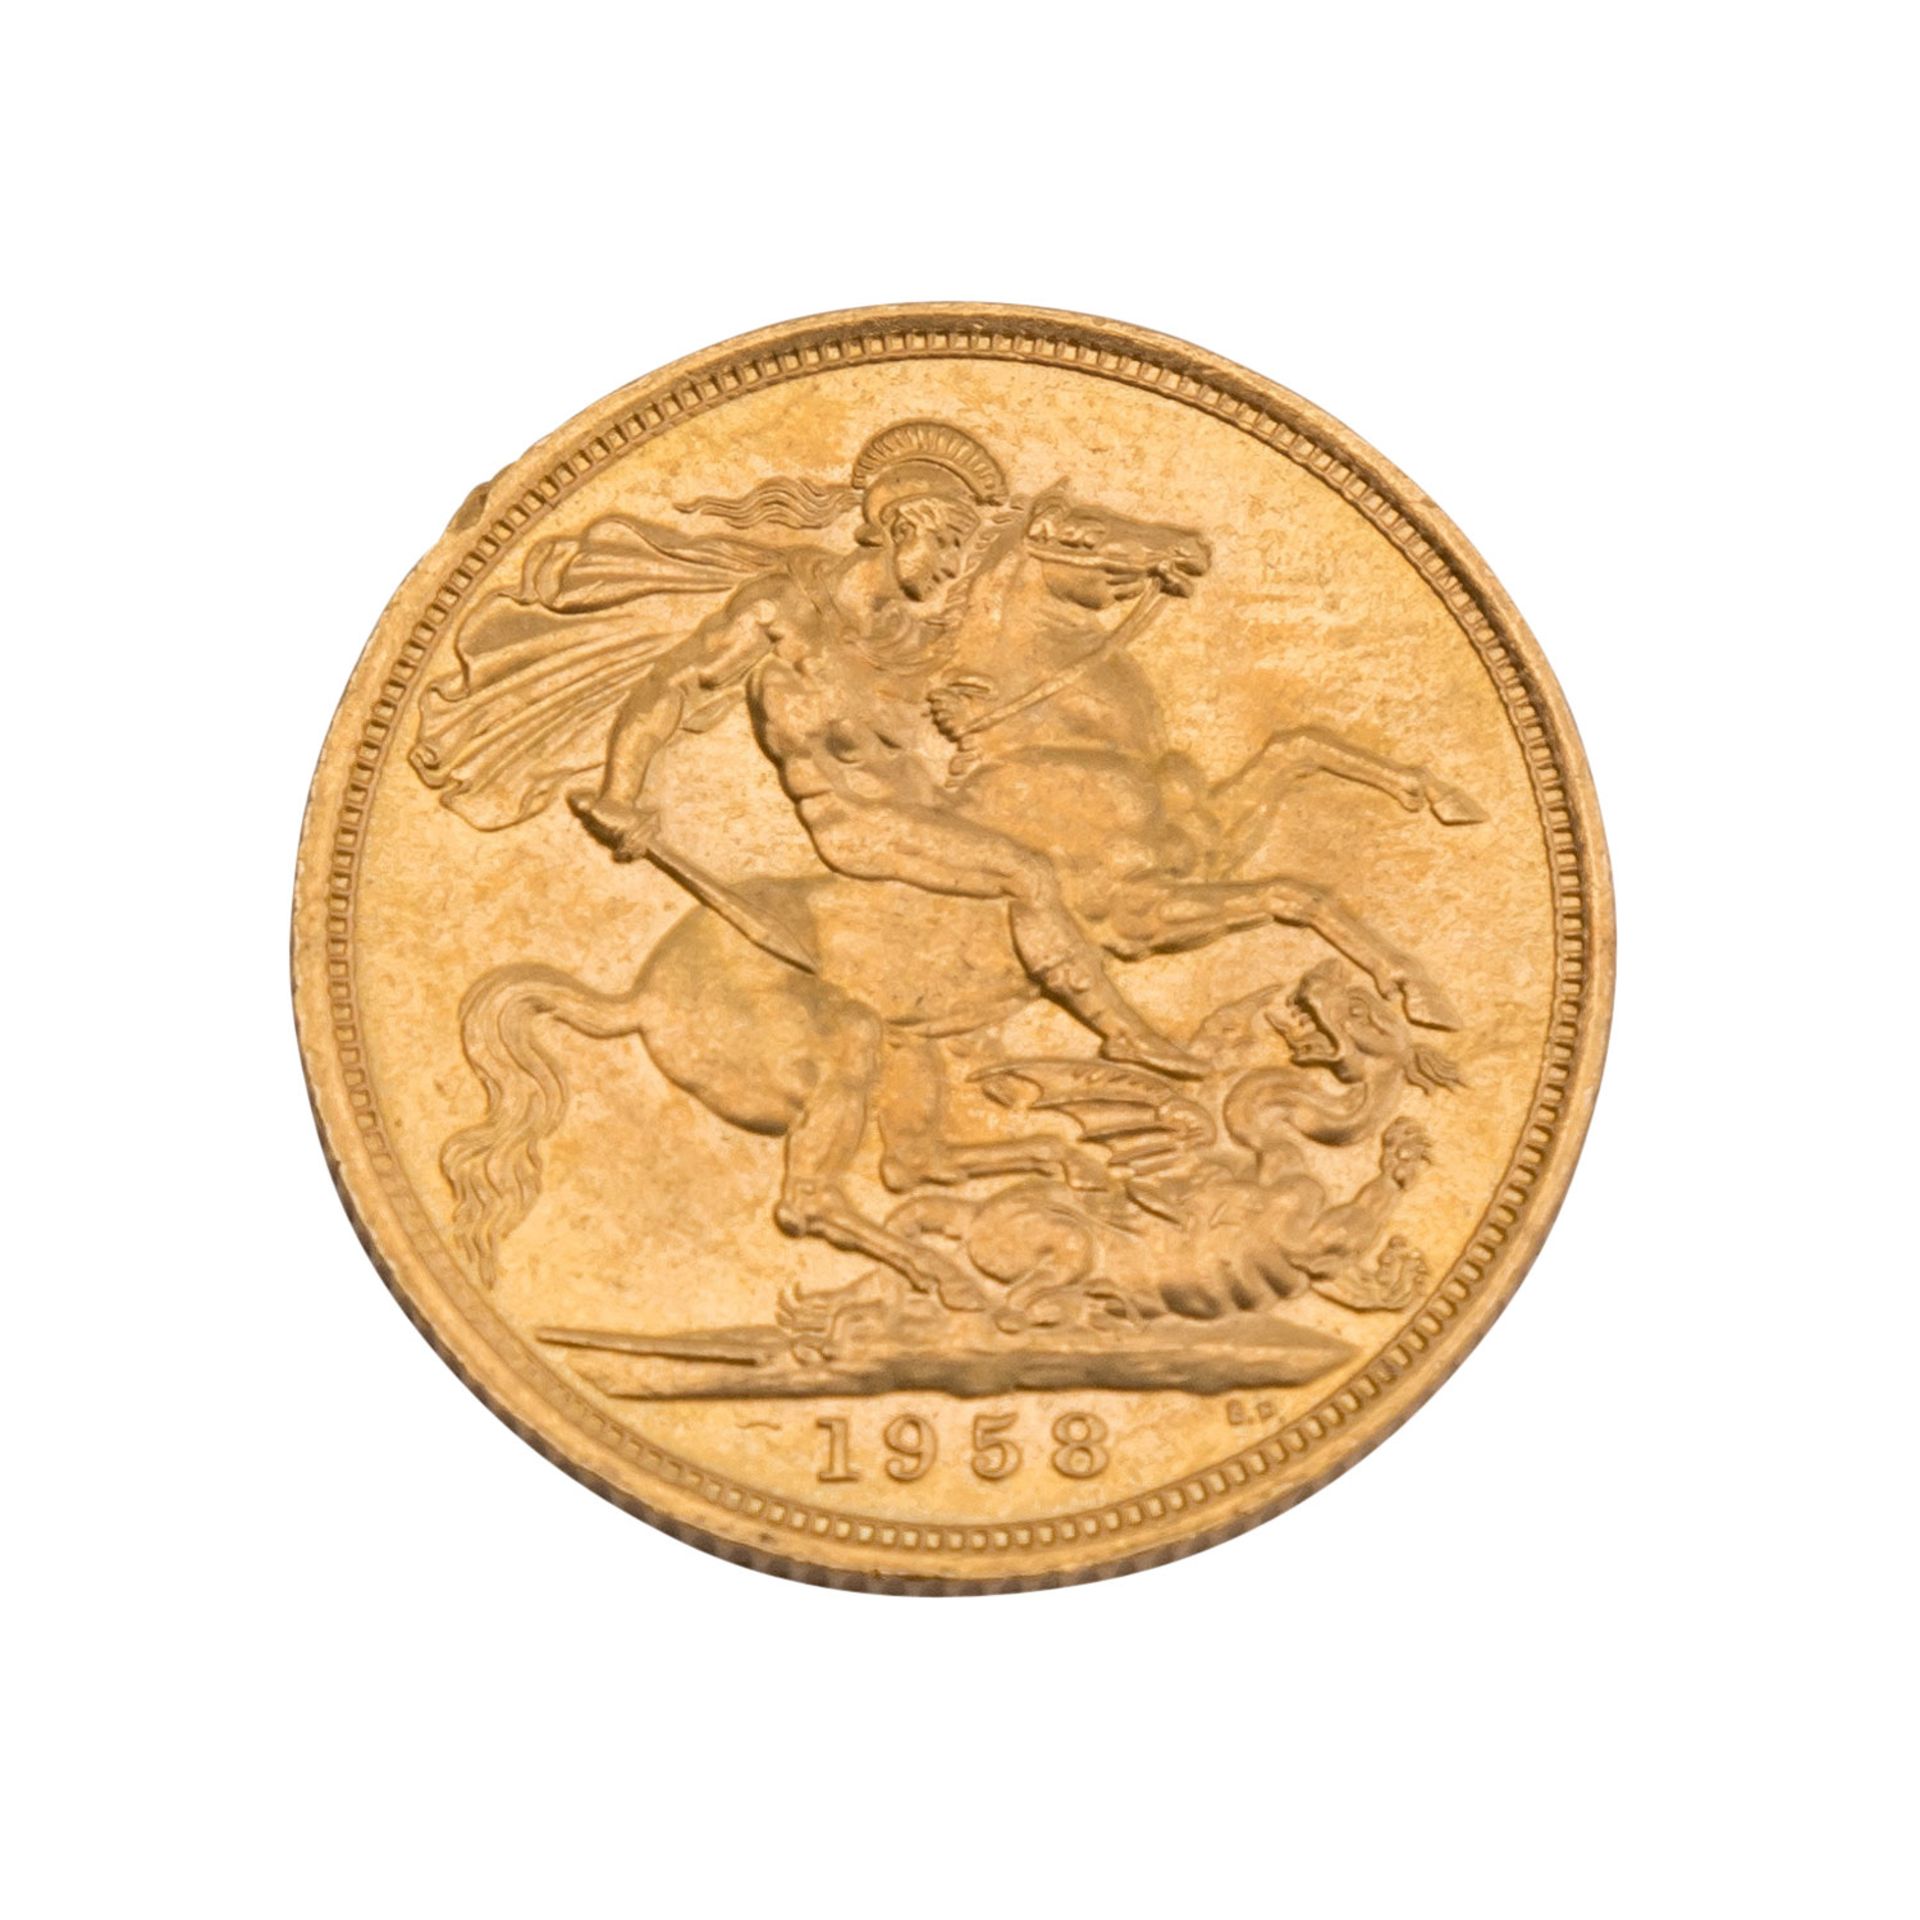 GB/GOLD - 1 Sovereign 1958, - Image 2 of 2